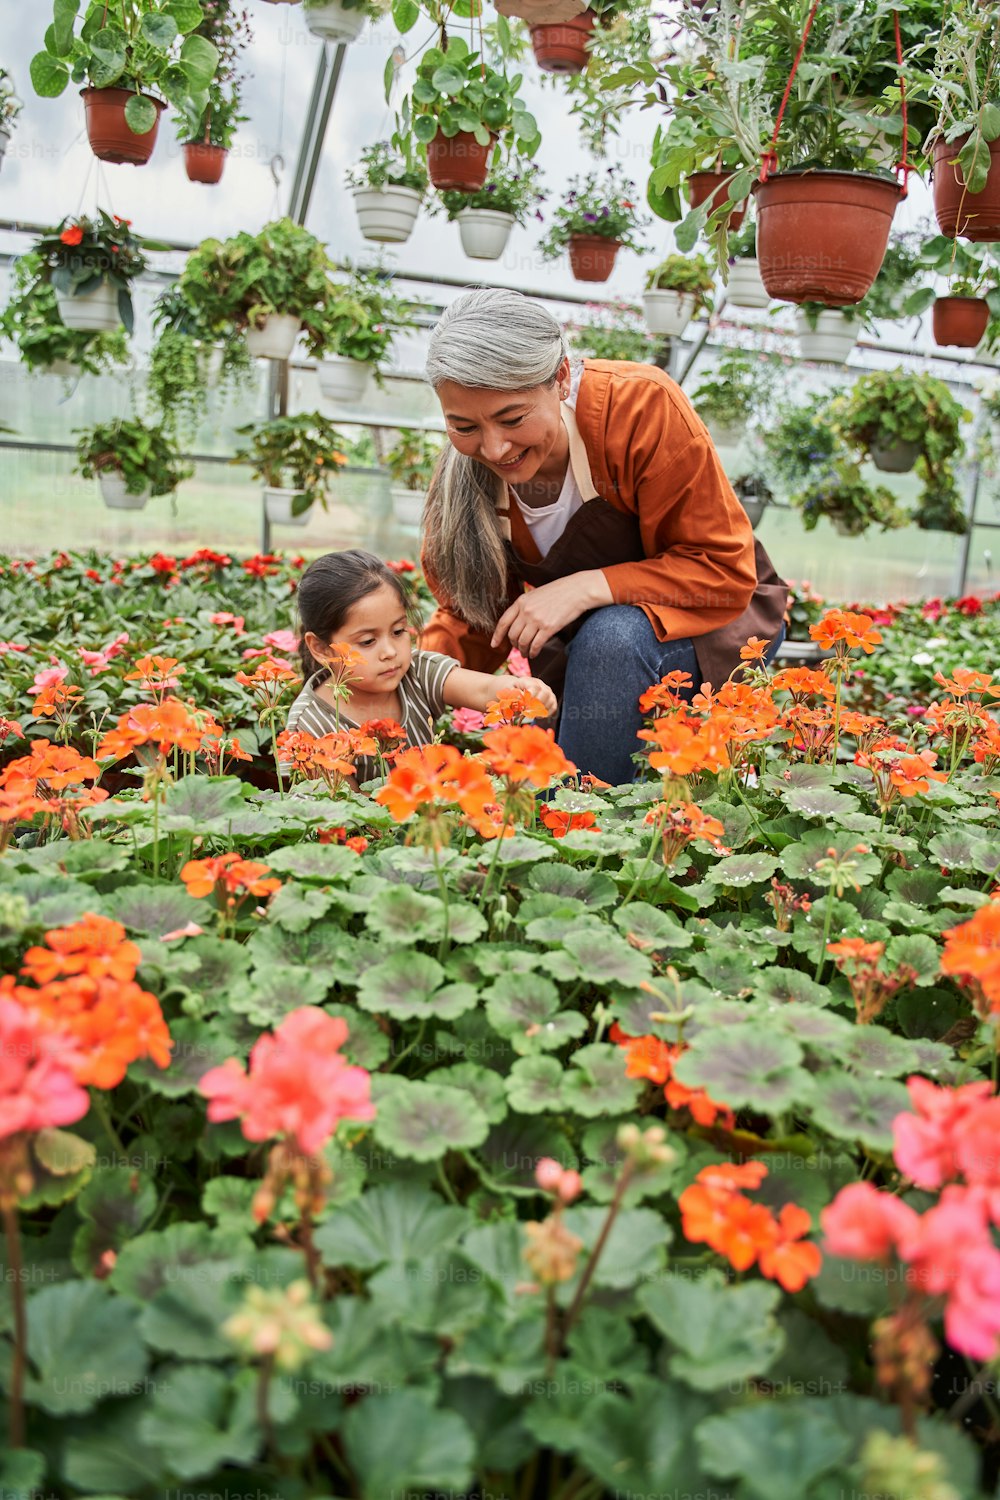 Nature activity. Cropped view of the diligent girl looking at the flowers after planting at the greenhouse with her grandmother. Stock photo